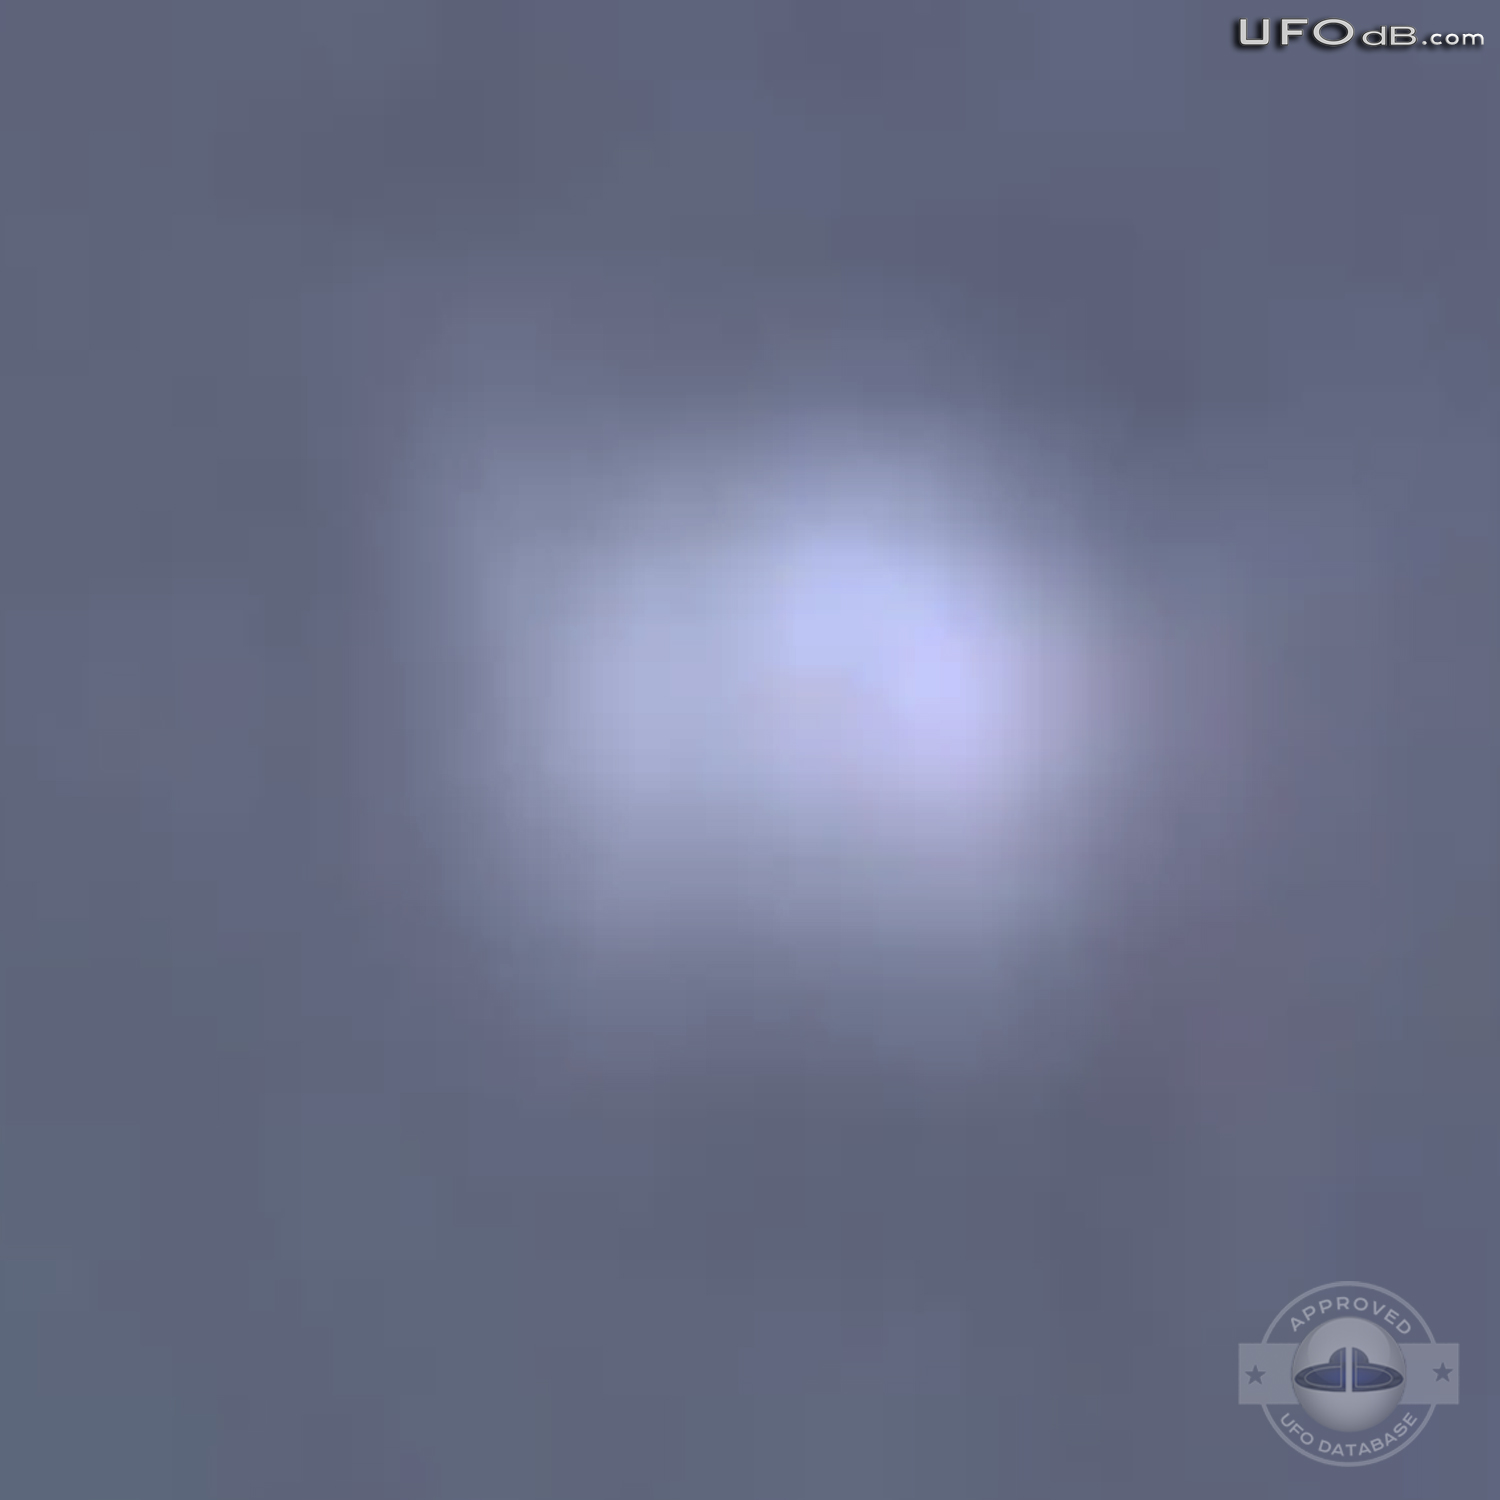 White craft UFO passing in the clouds of Mexico City | May 13 2011 UFO Picture #305-6